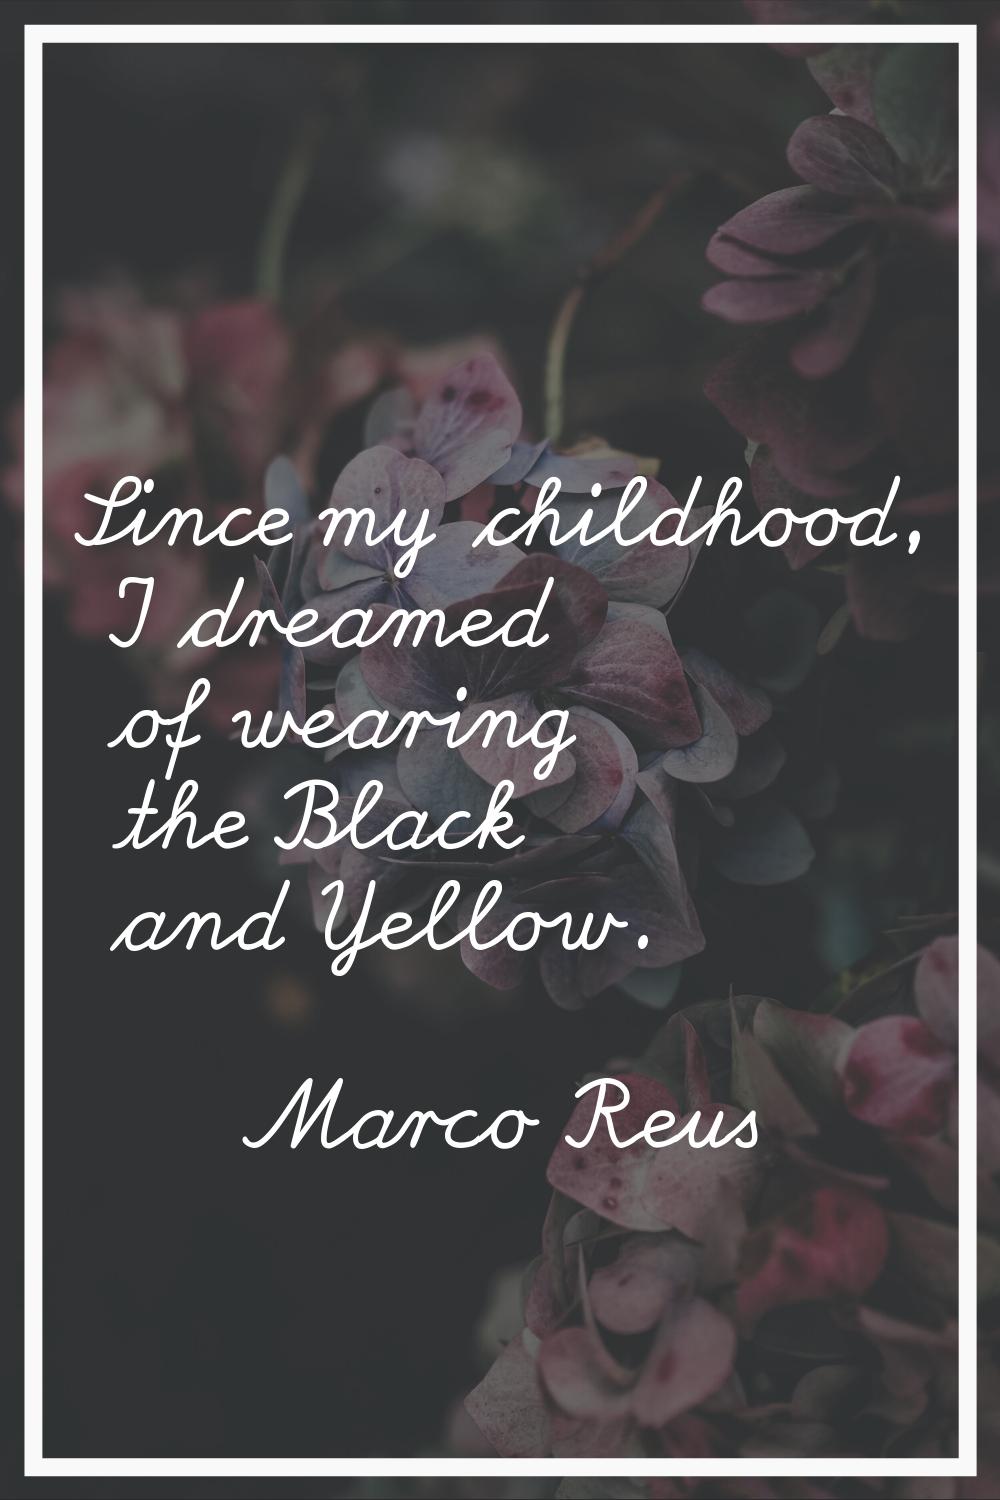 Since my childhood, I dreamed of wearing the Black and Yellow.